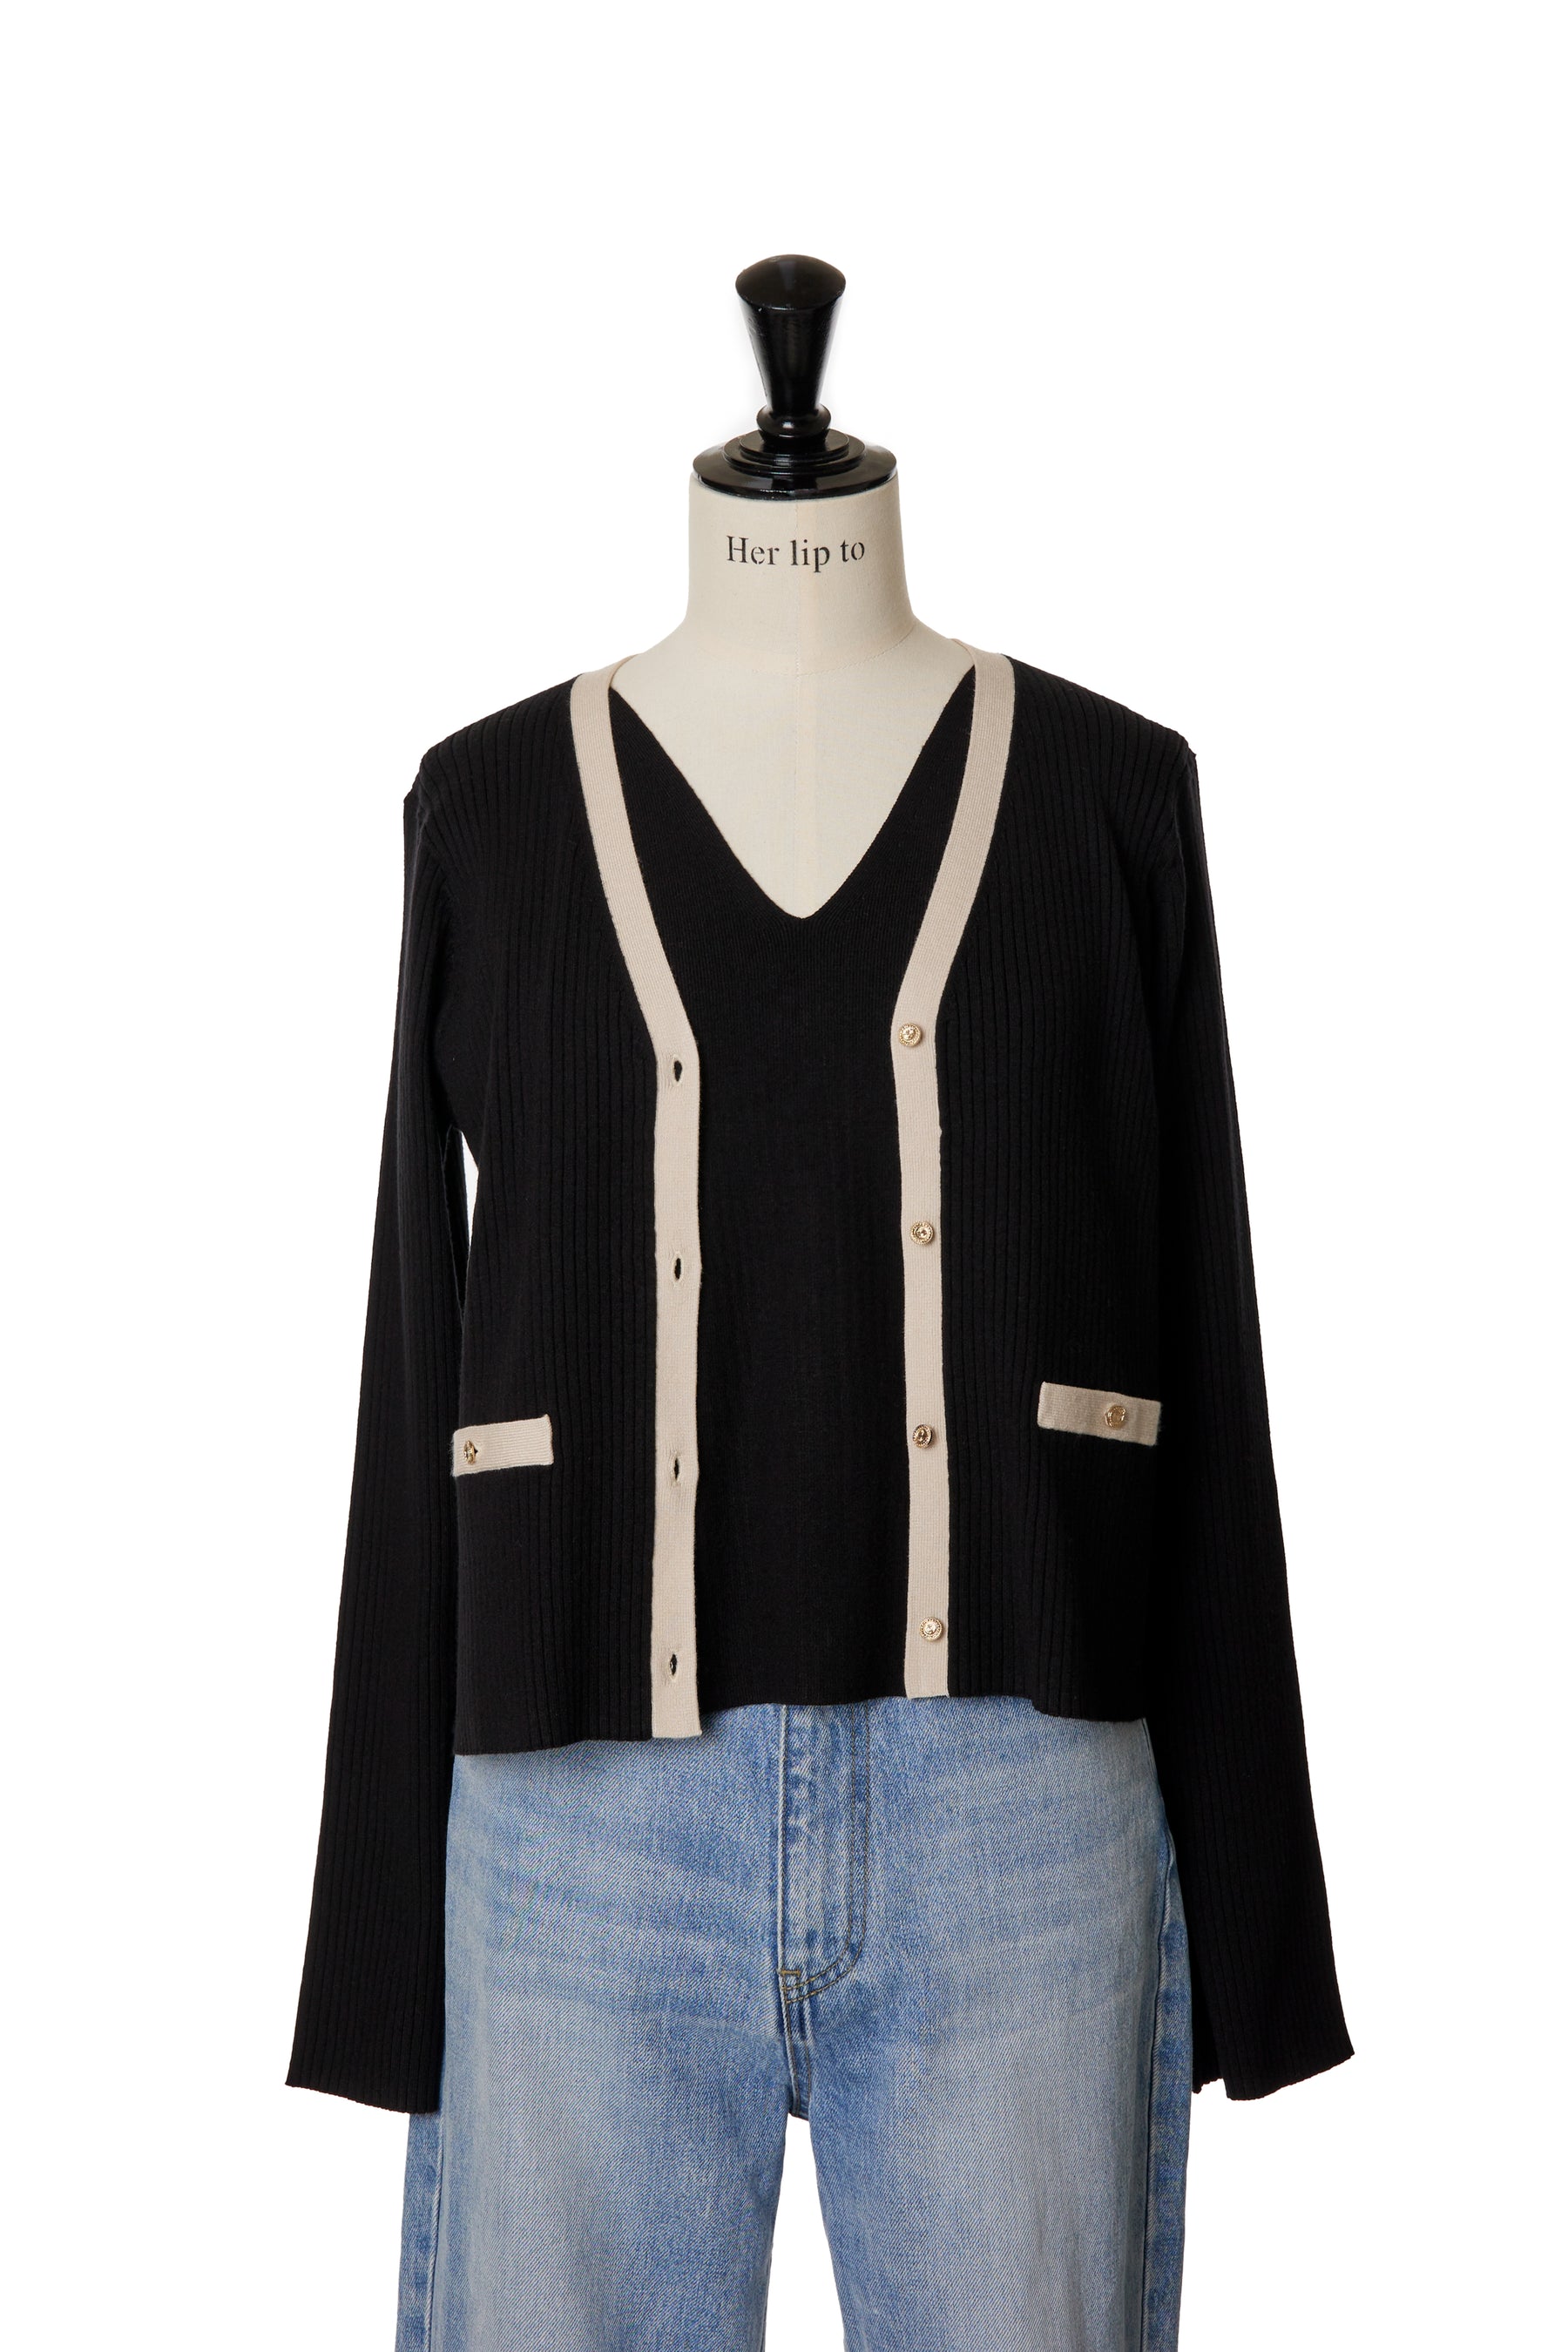 her lip to Belted Knutsford Cardigan